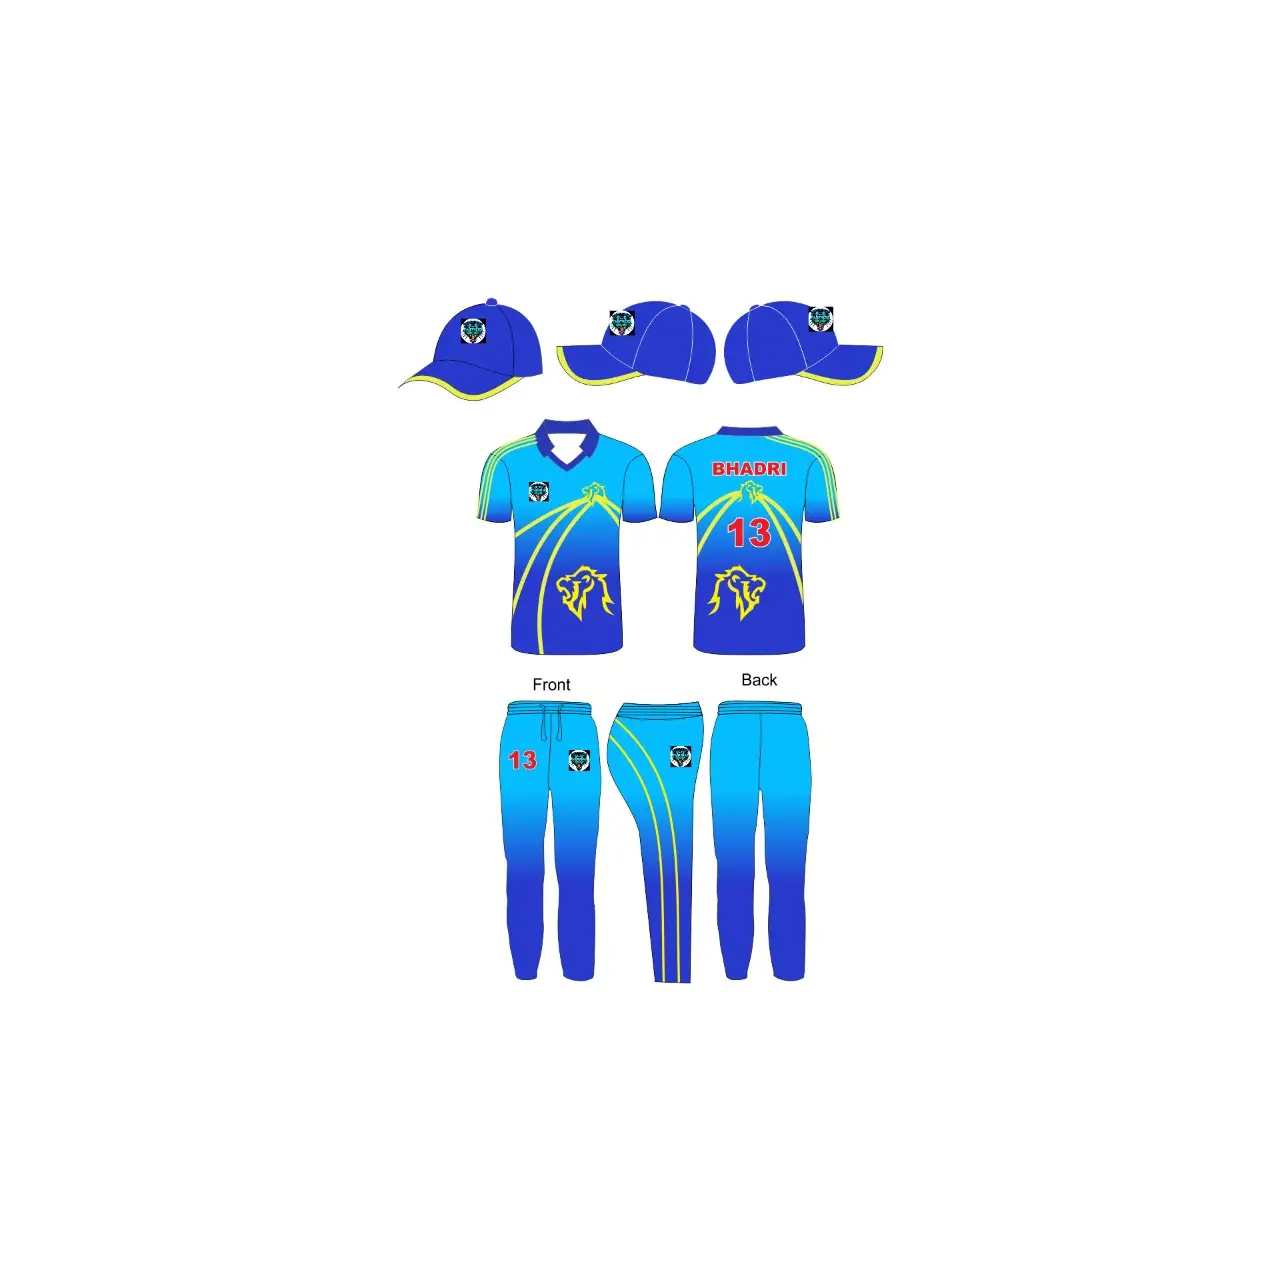 cricket team logos without names